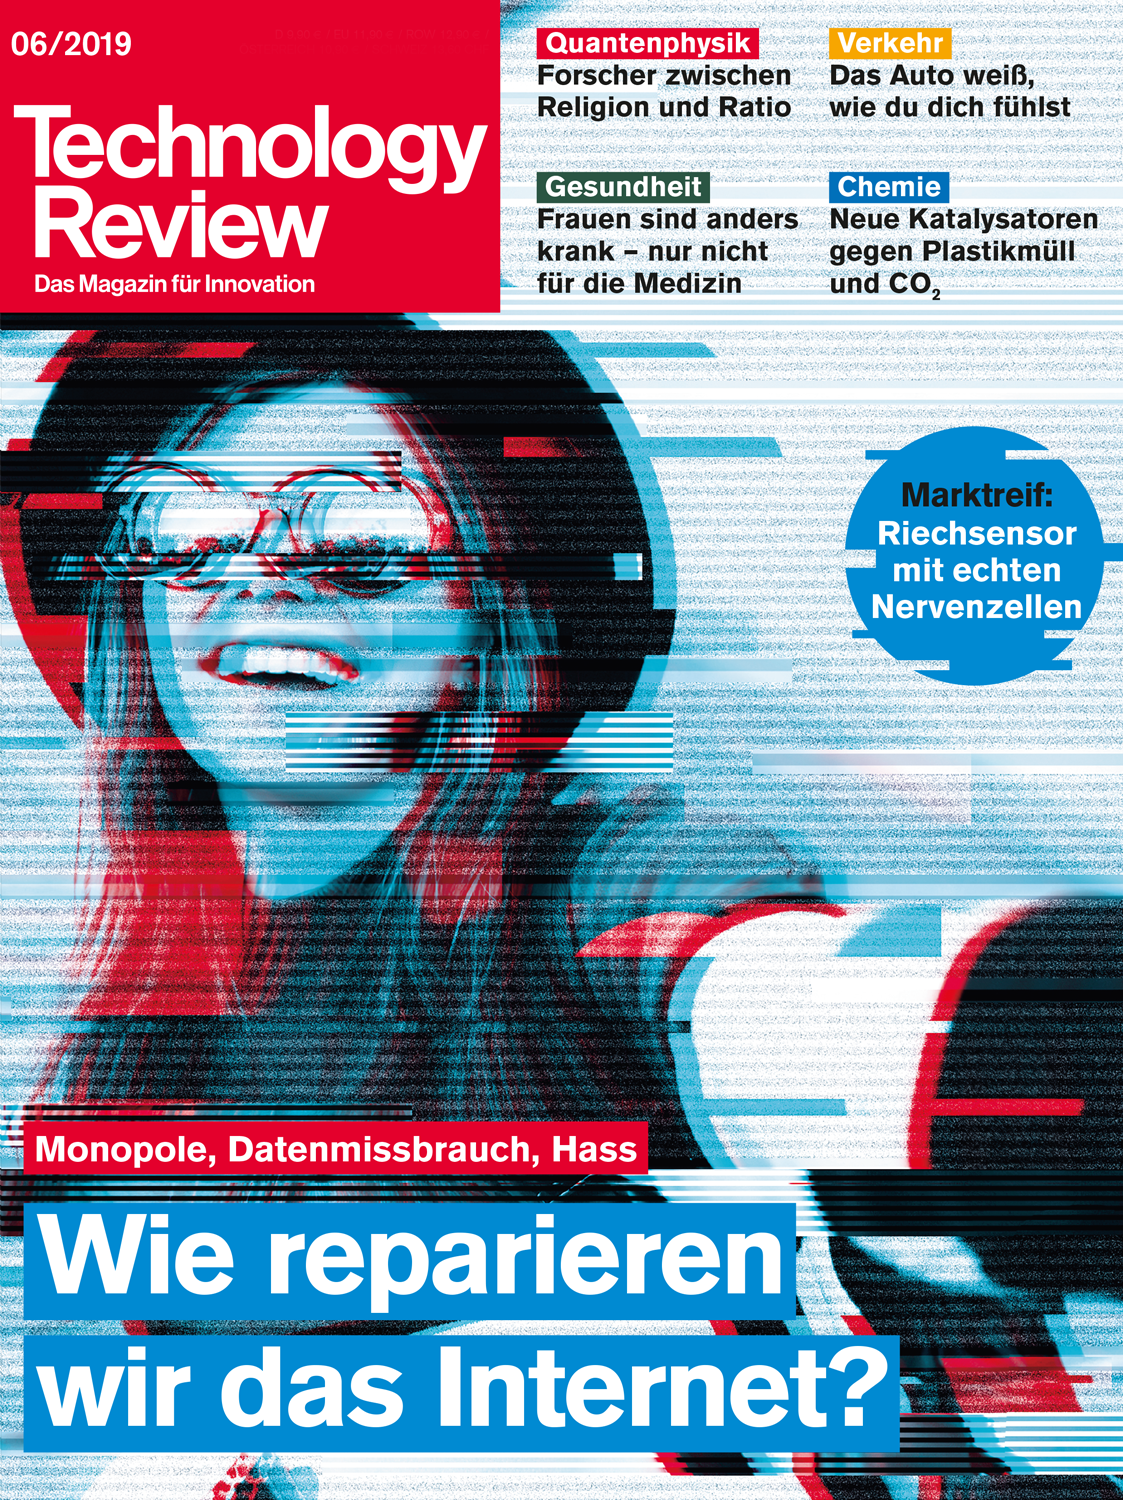 Technology Review 06/2019